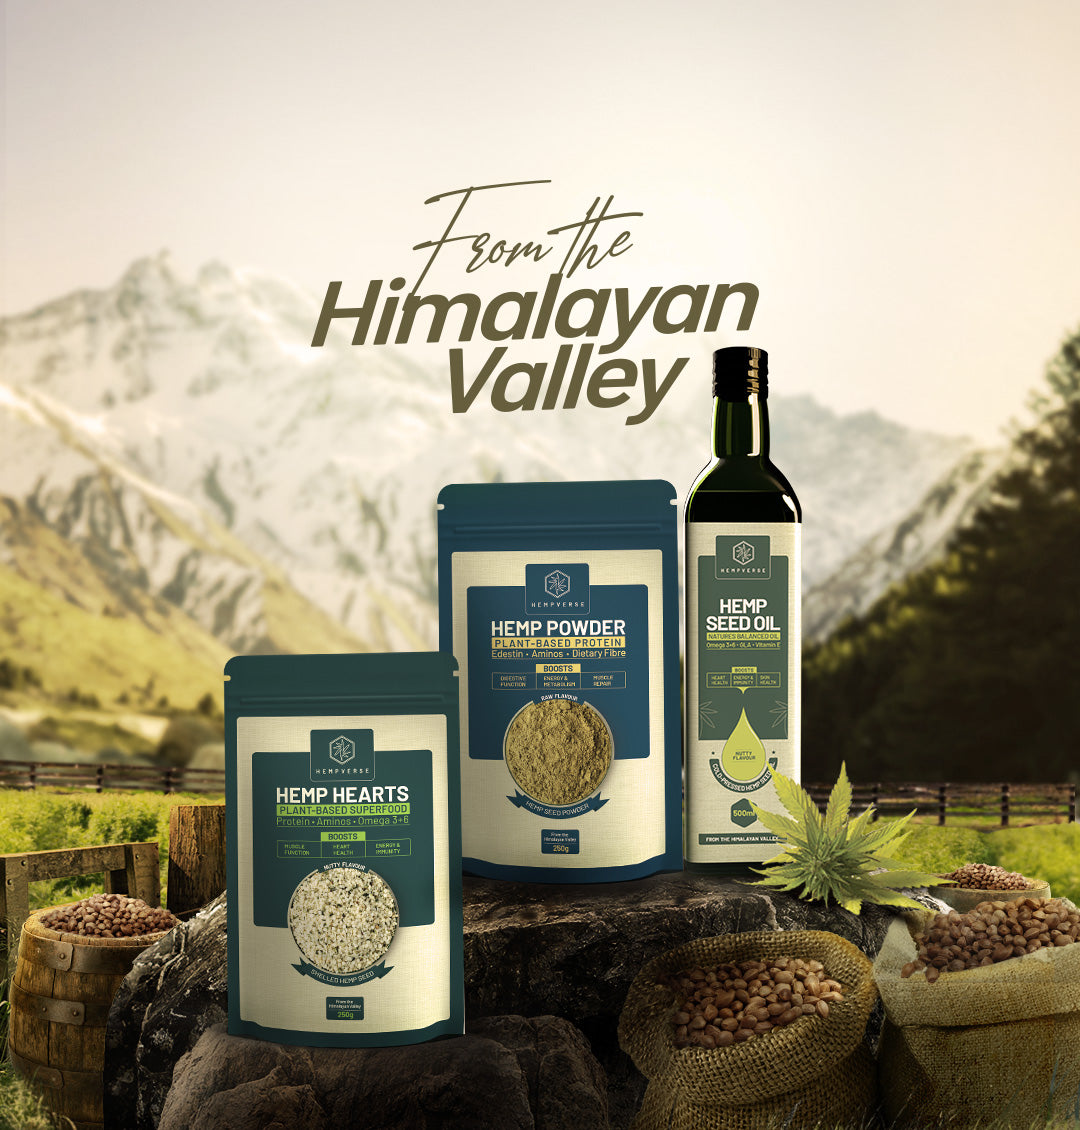 Hemp hearts, hemp powder, and hemp oil are kept in the Himalayan valley's background.